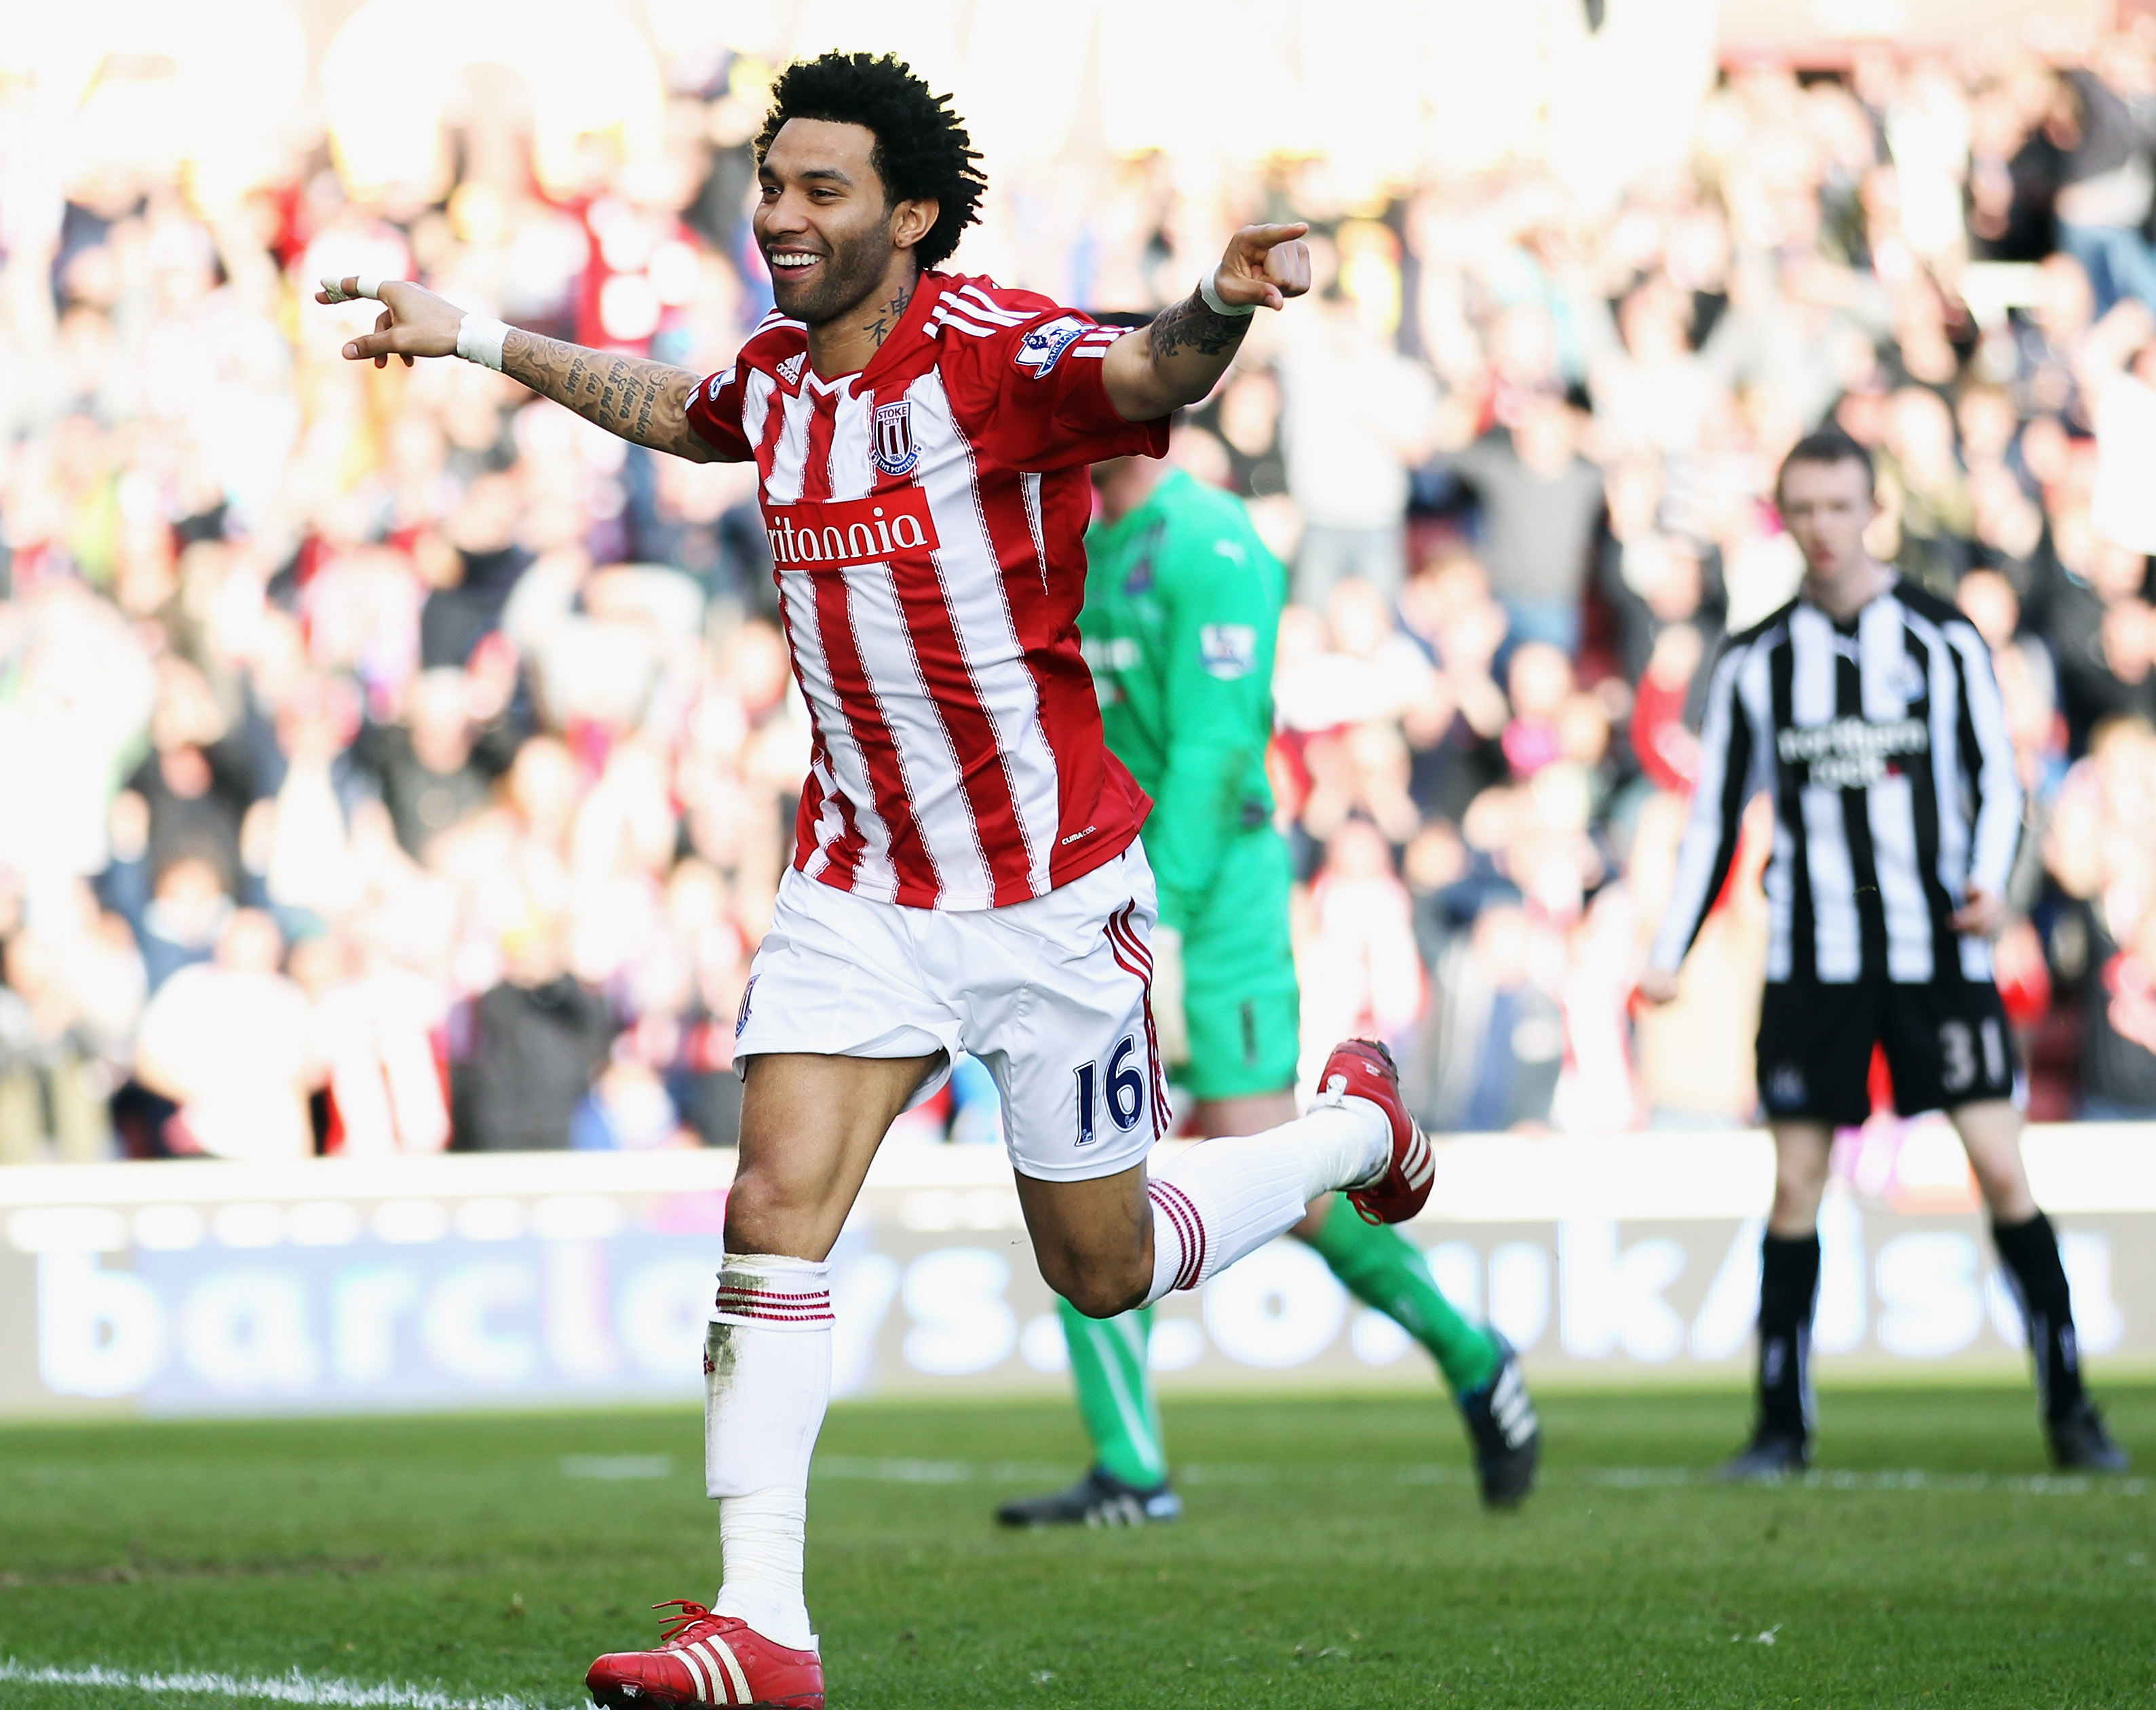 STOKE ON TRENT, ENGLAND - MARCH 19:  Jermaine Pennant of Stoke City celebrates scoring during the Barclays Premier League match between Stoke City and Newcastle United at Britannia Stadium on March 19, 2011 in Stoke on Trent, England.  (Photo by Bryn Lenn